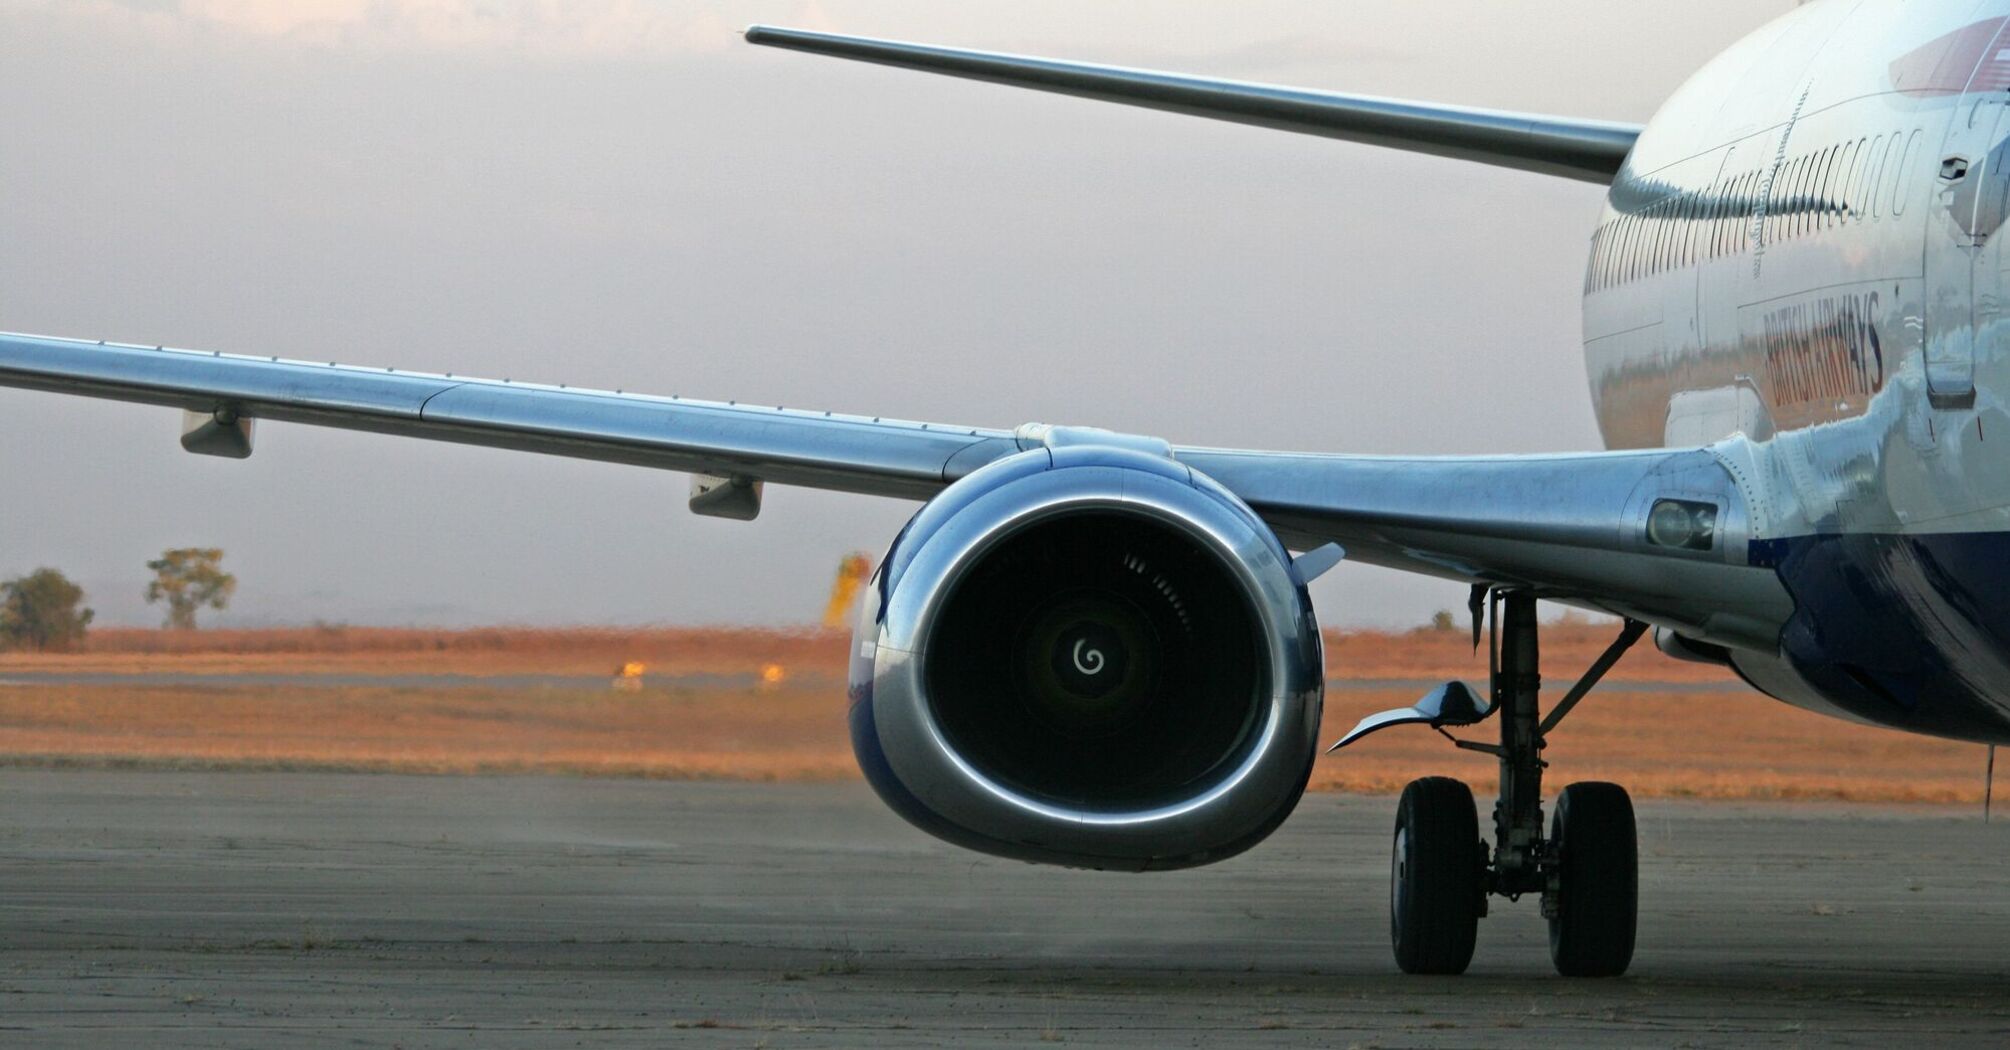 Close-up of an airplane engine and landing gear on the runway